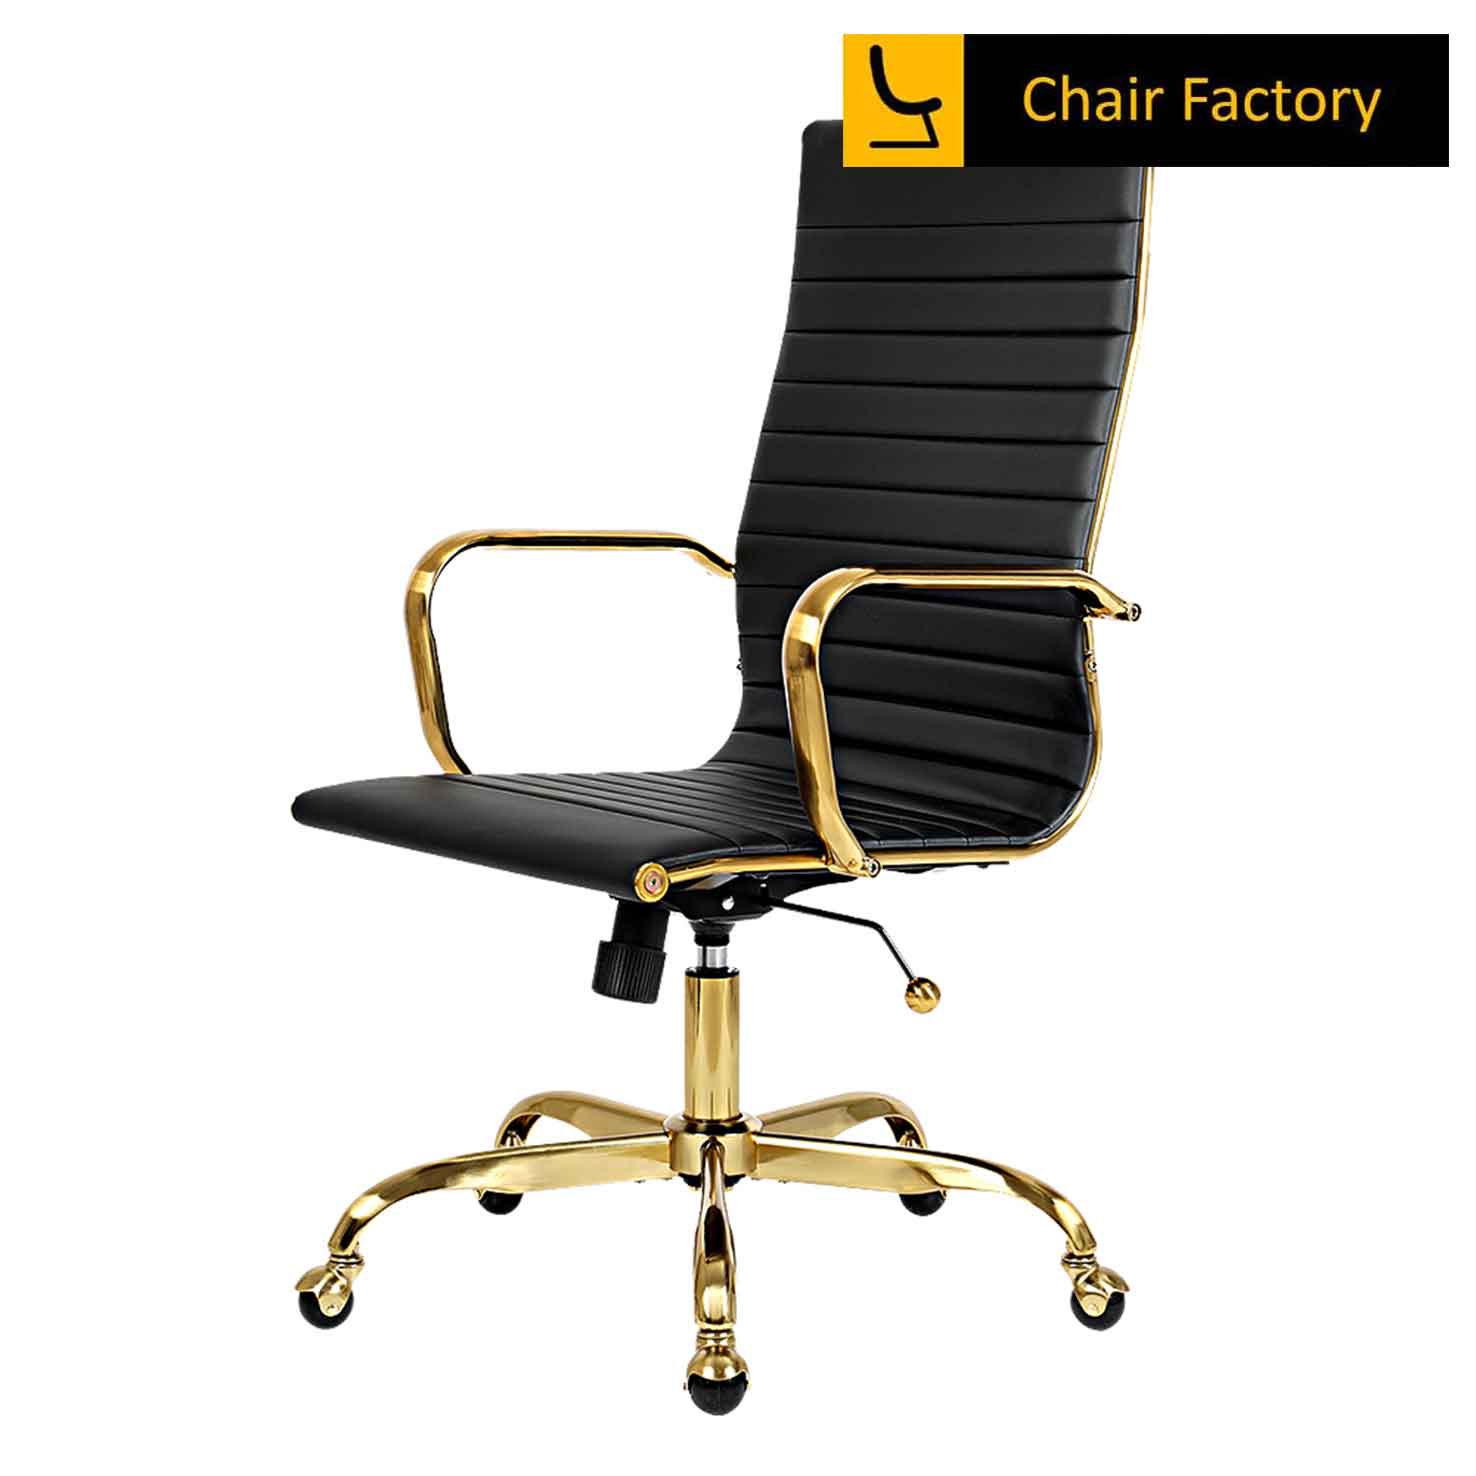 James Single Cushion High Back conference Room black leather Chair with gold frame